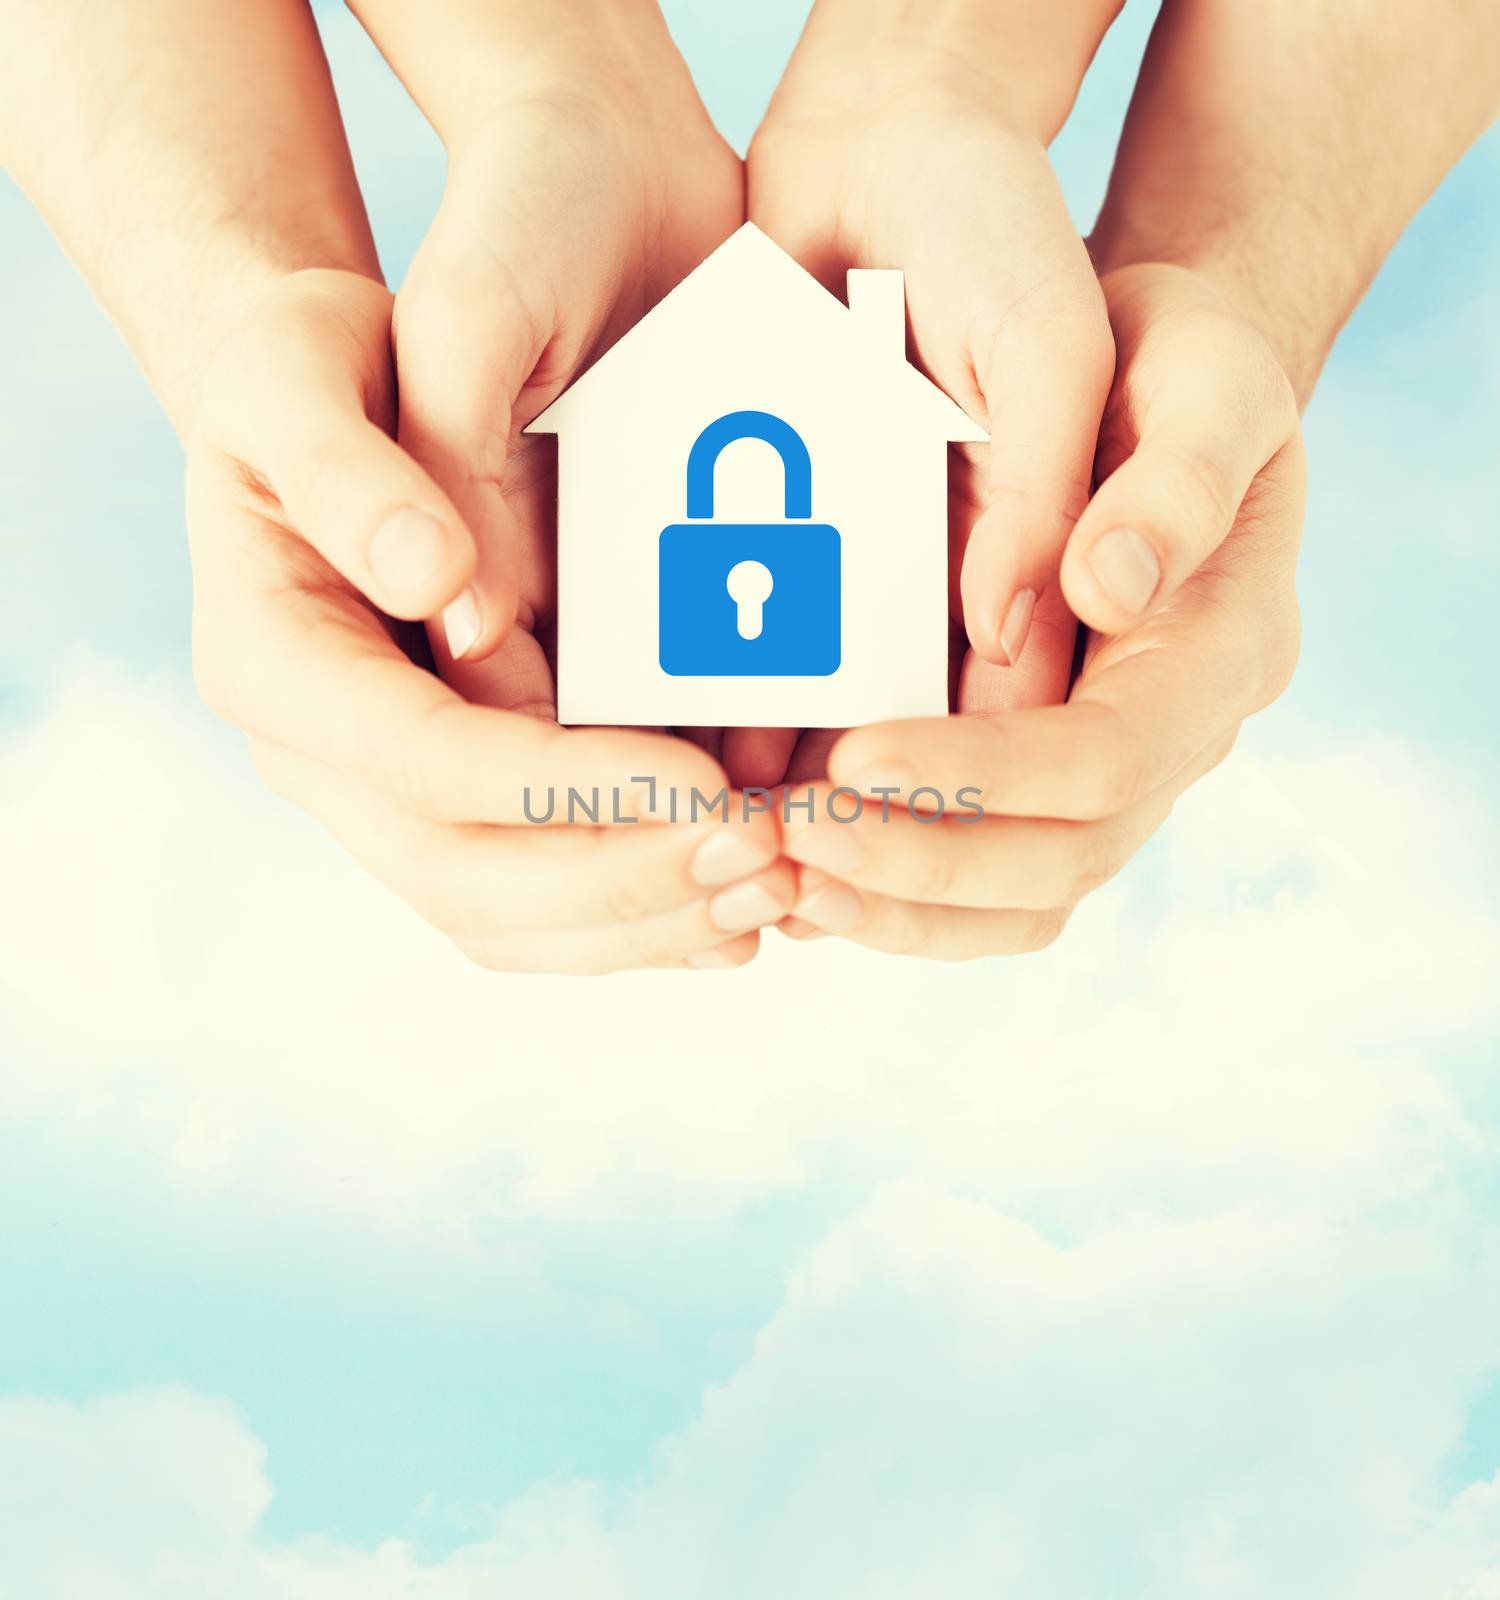 real estate and family home security concept - closeup picture of male and female hands holding white paper house with blue lock